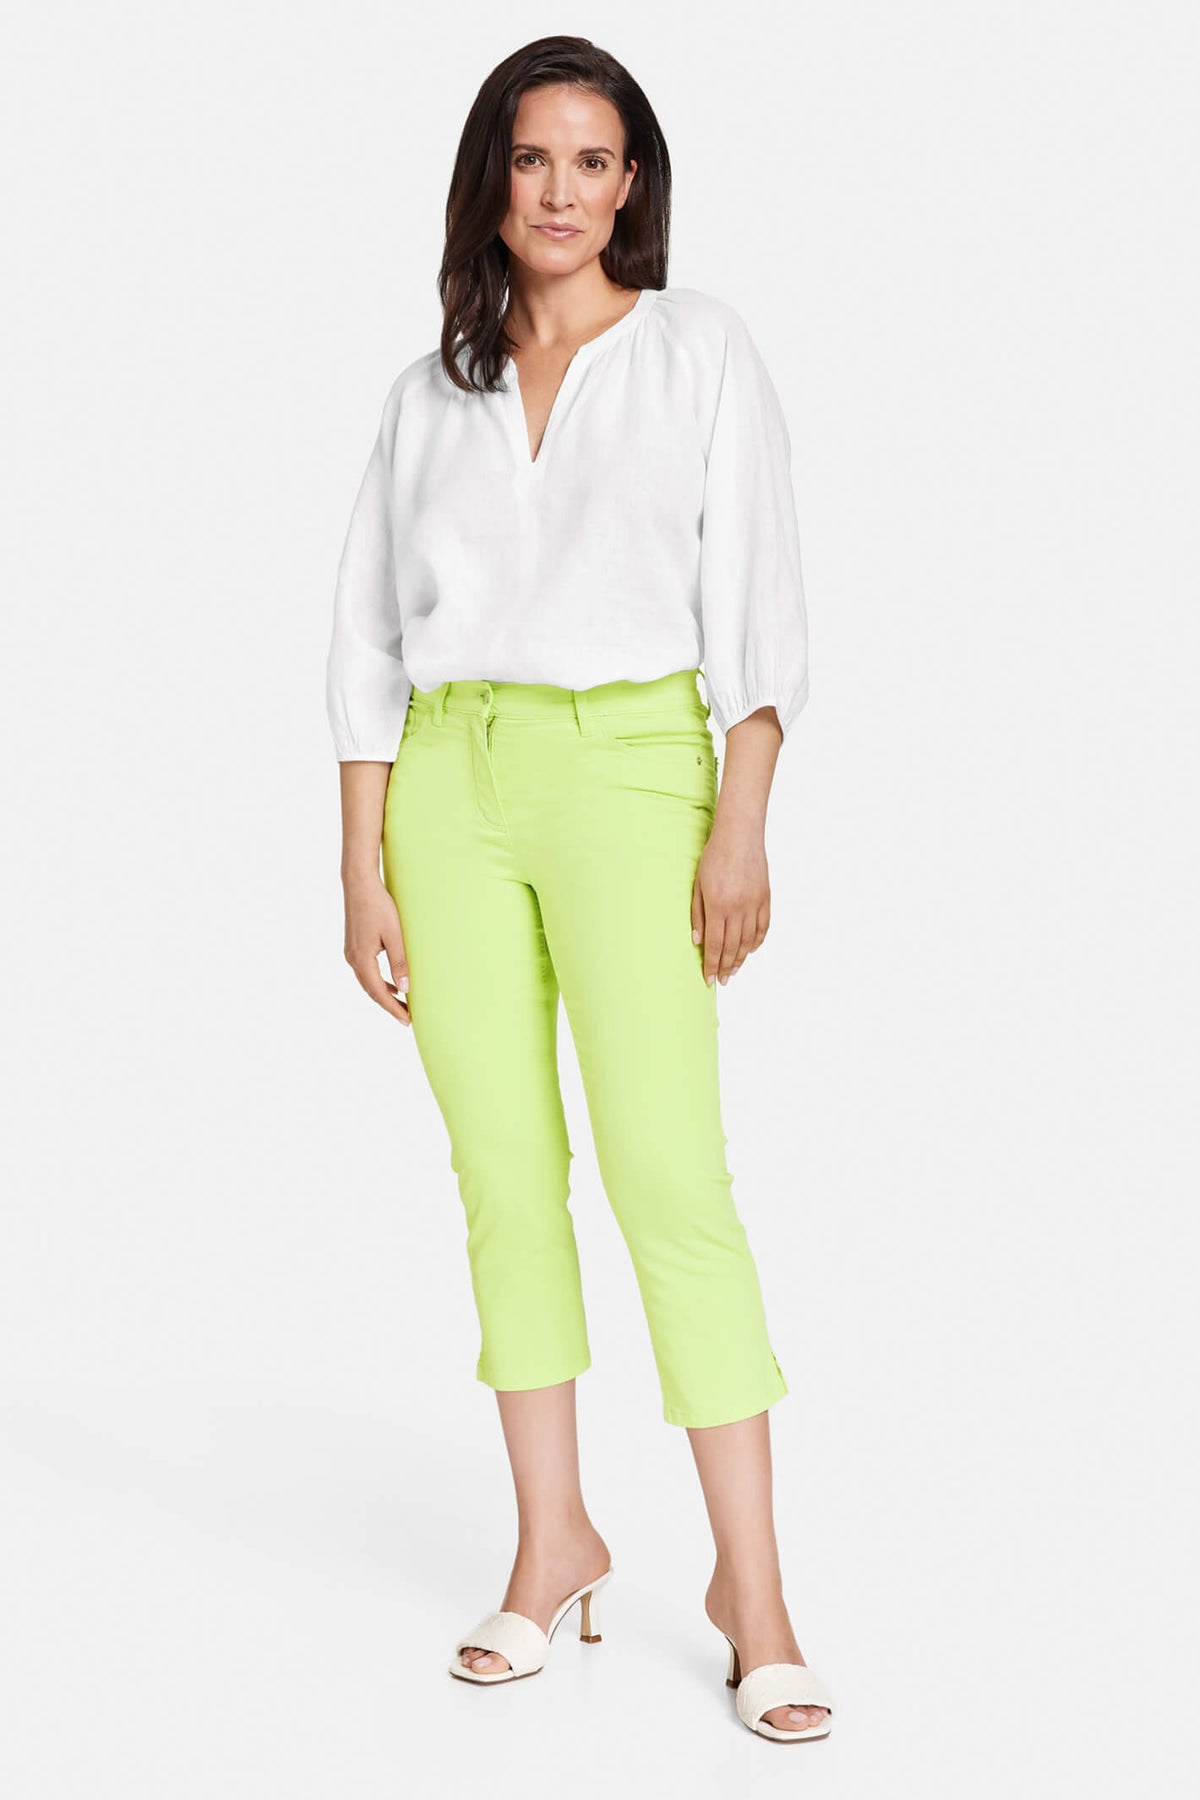 SOLEMIO Lime Green Regular Fit Flat Front Trousers